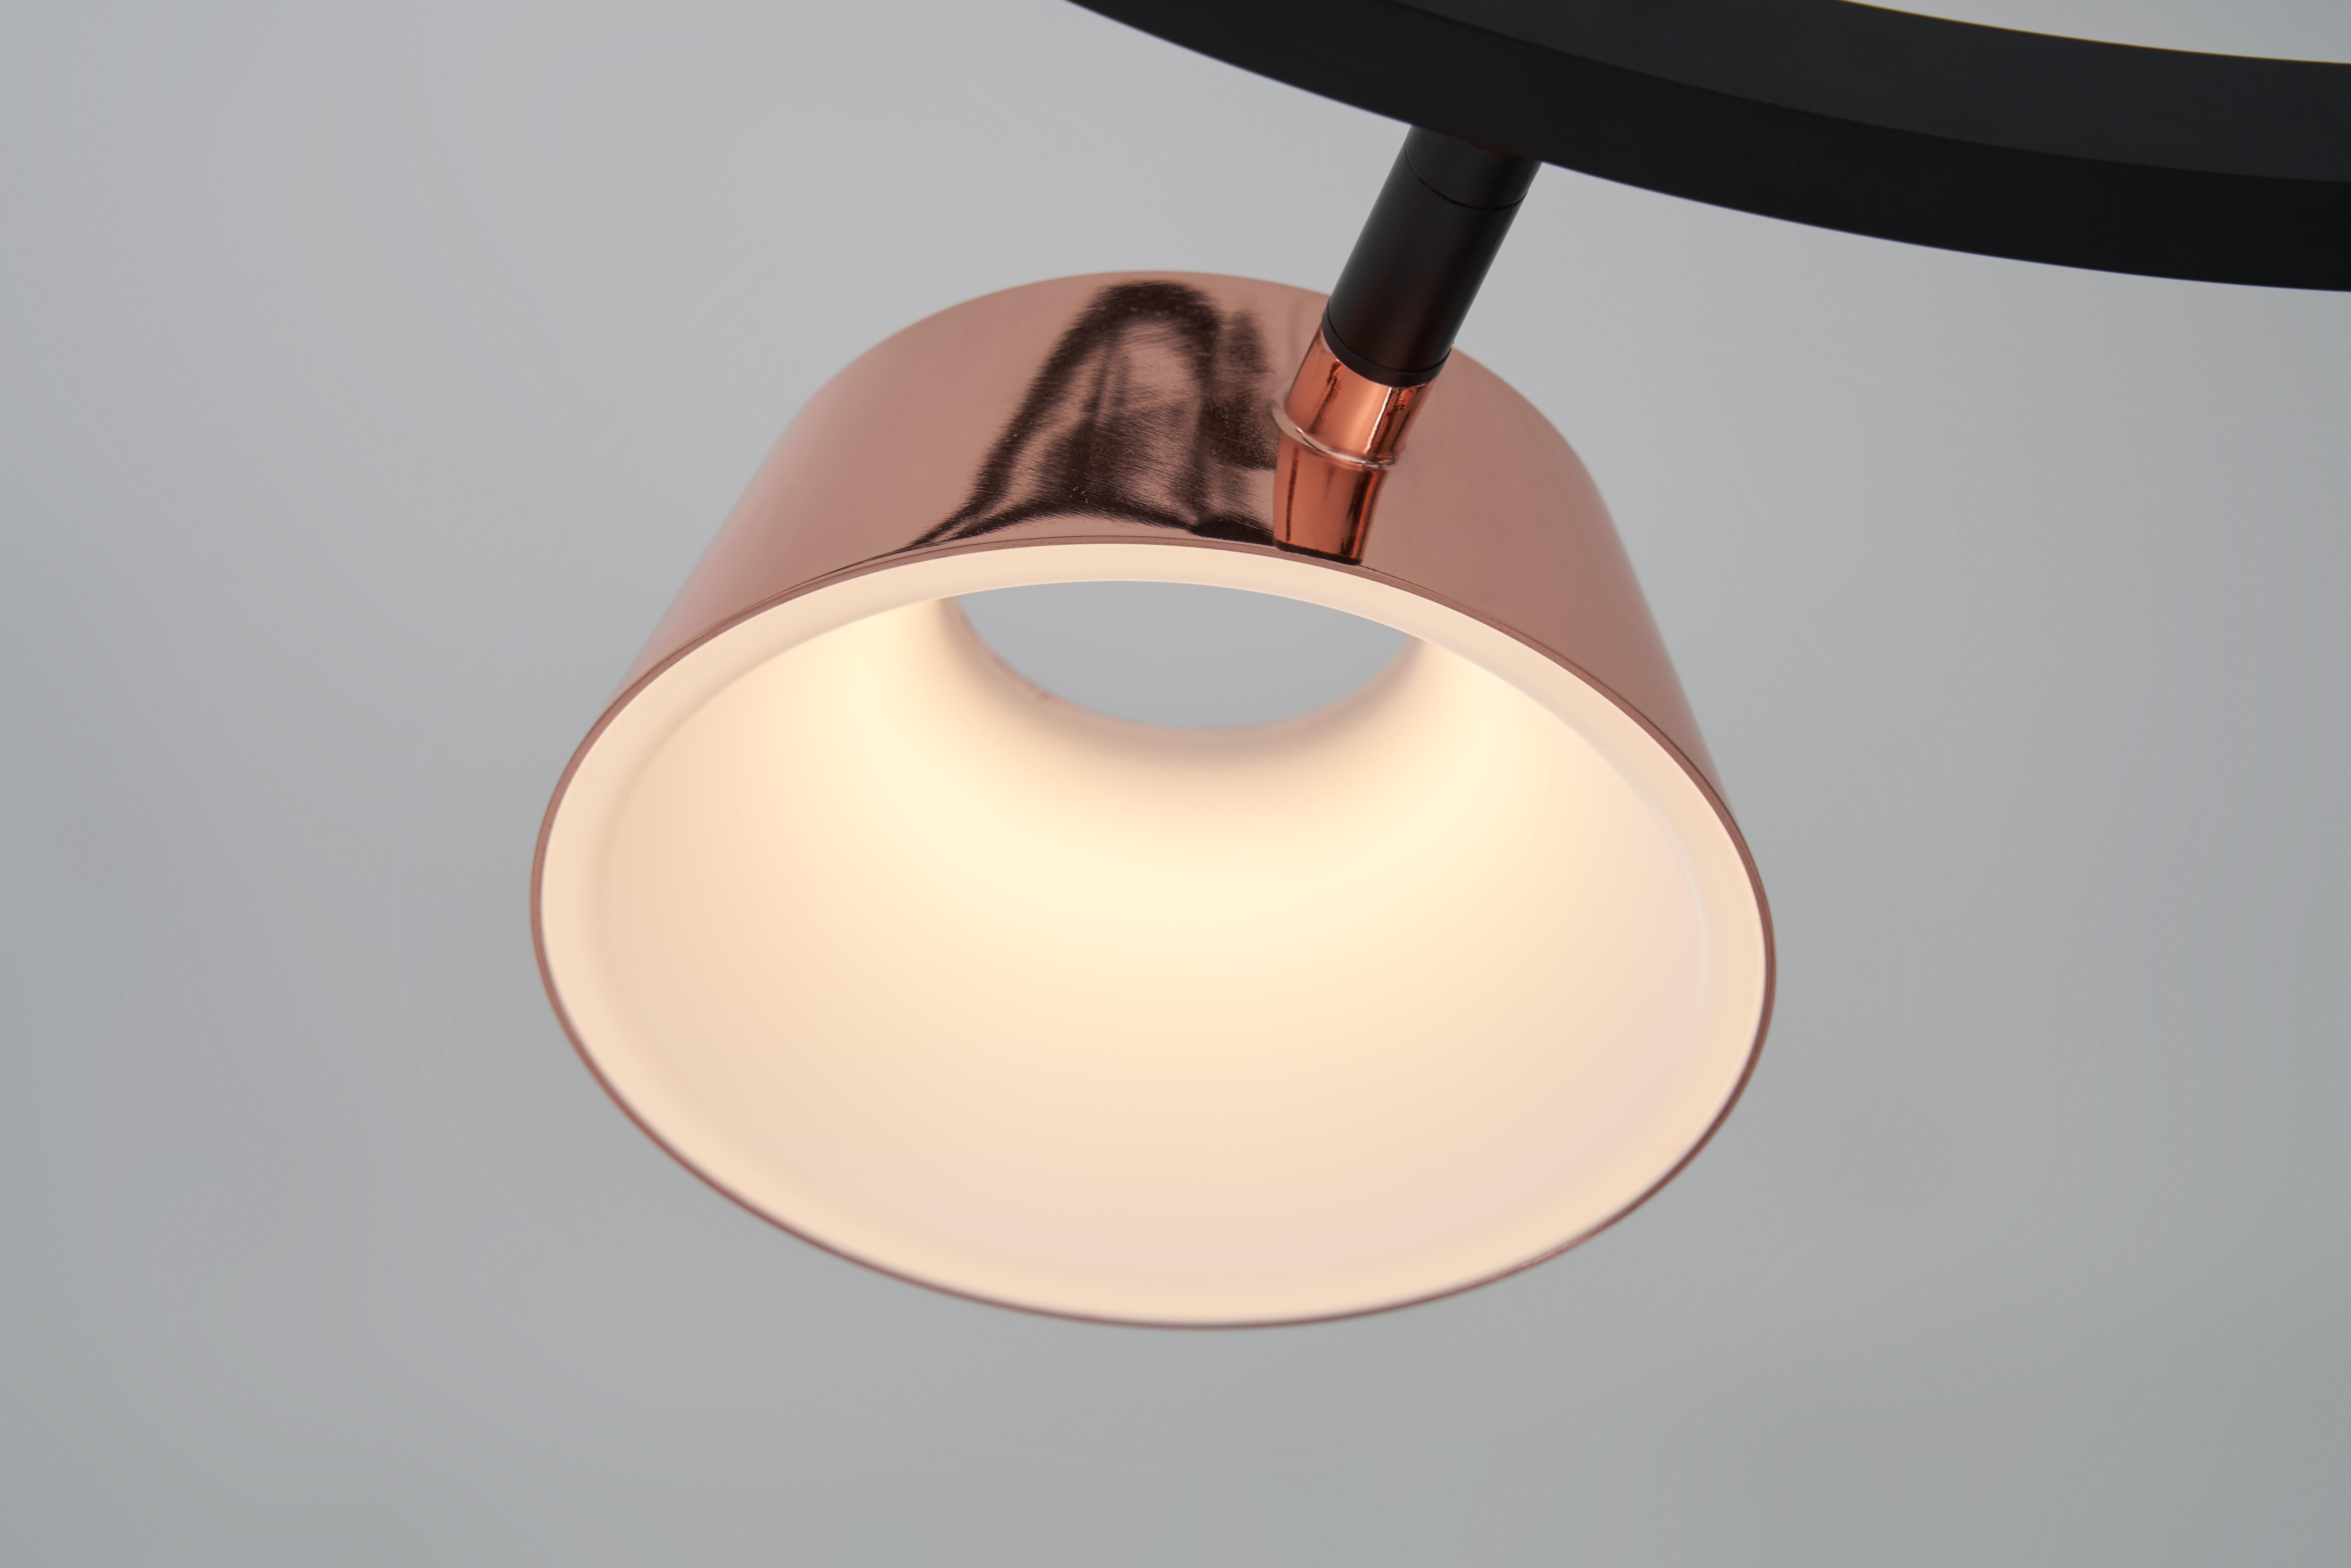 Olo pendant PC4 always originates from a circle or a line. Rotatable lamp shade embedded in cutting-edge design of hollow circles with glare-free LED lighting, the CRI 90 softened light can impressively create practical as well as ambient light.